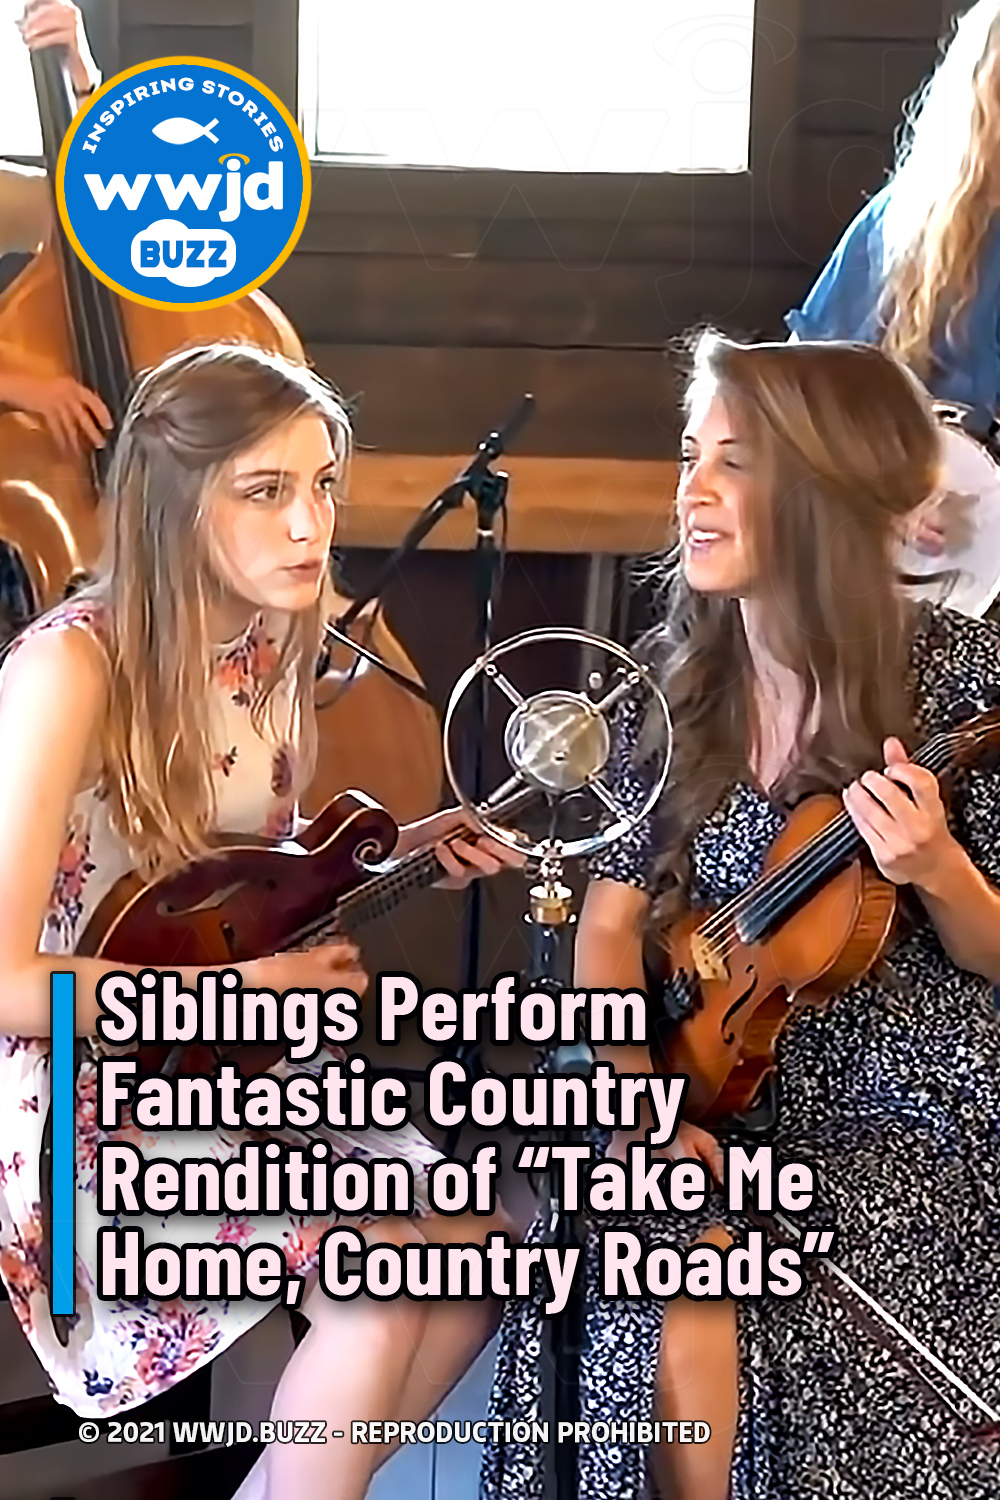 Siblings Perform Fantastic Country Rendition of “Take Me Home, Country Roads”